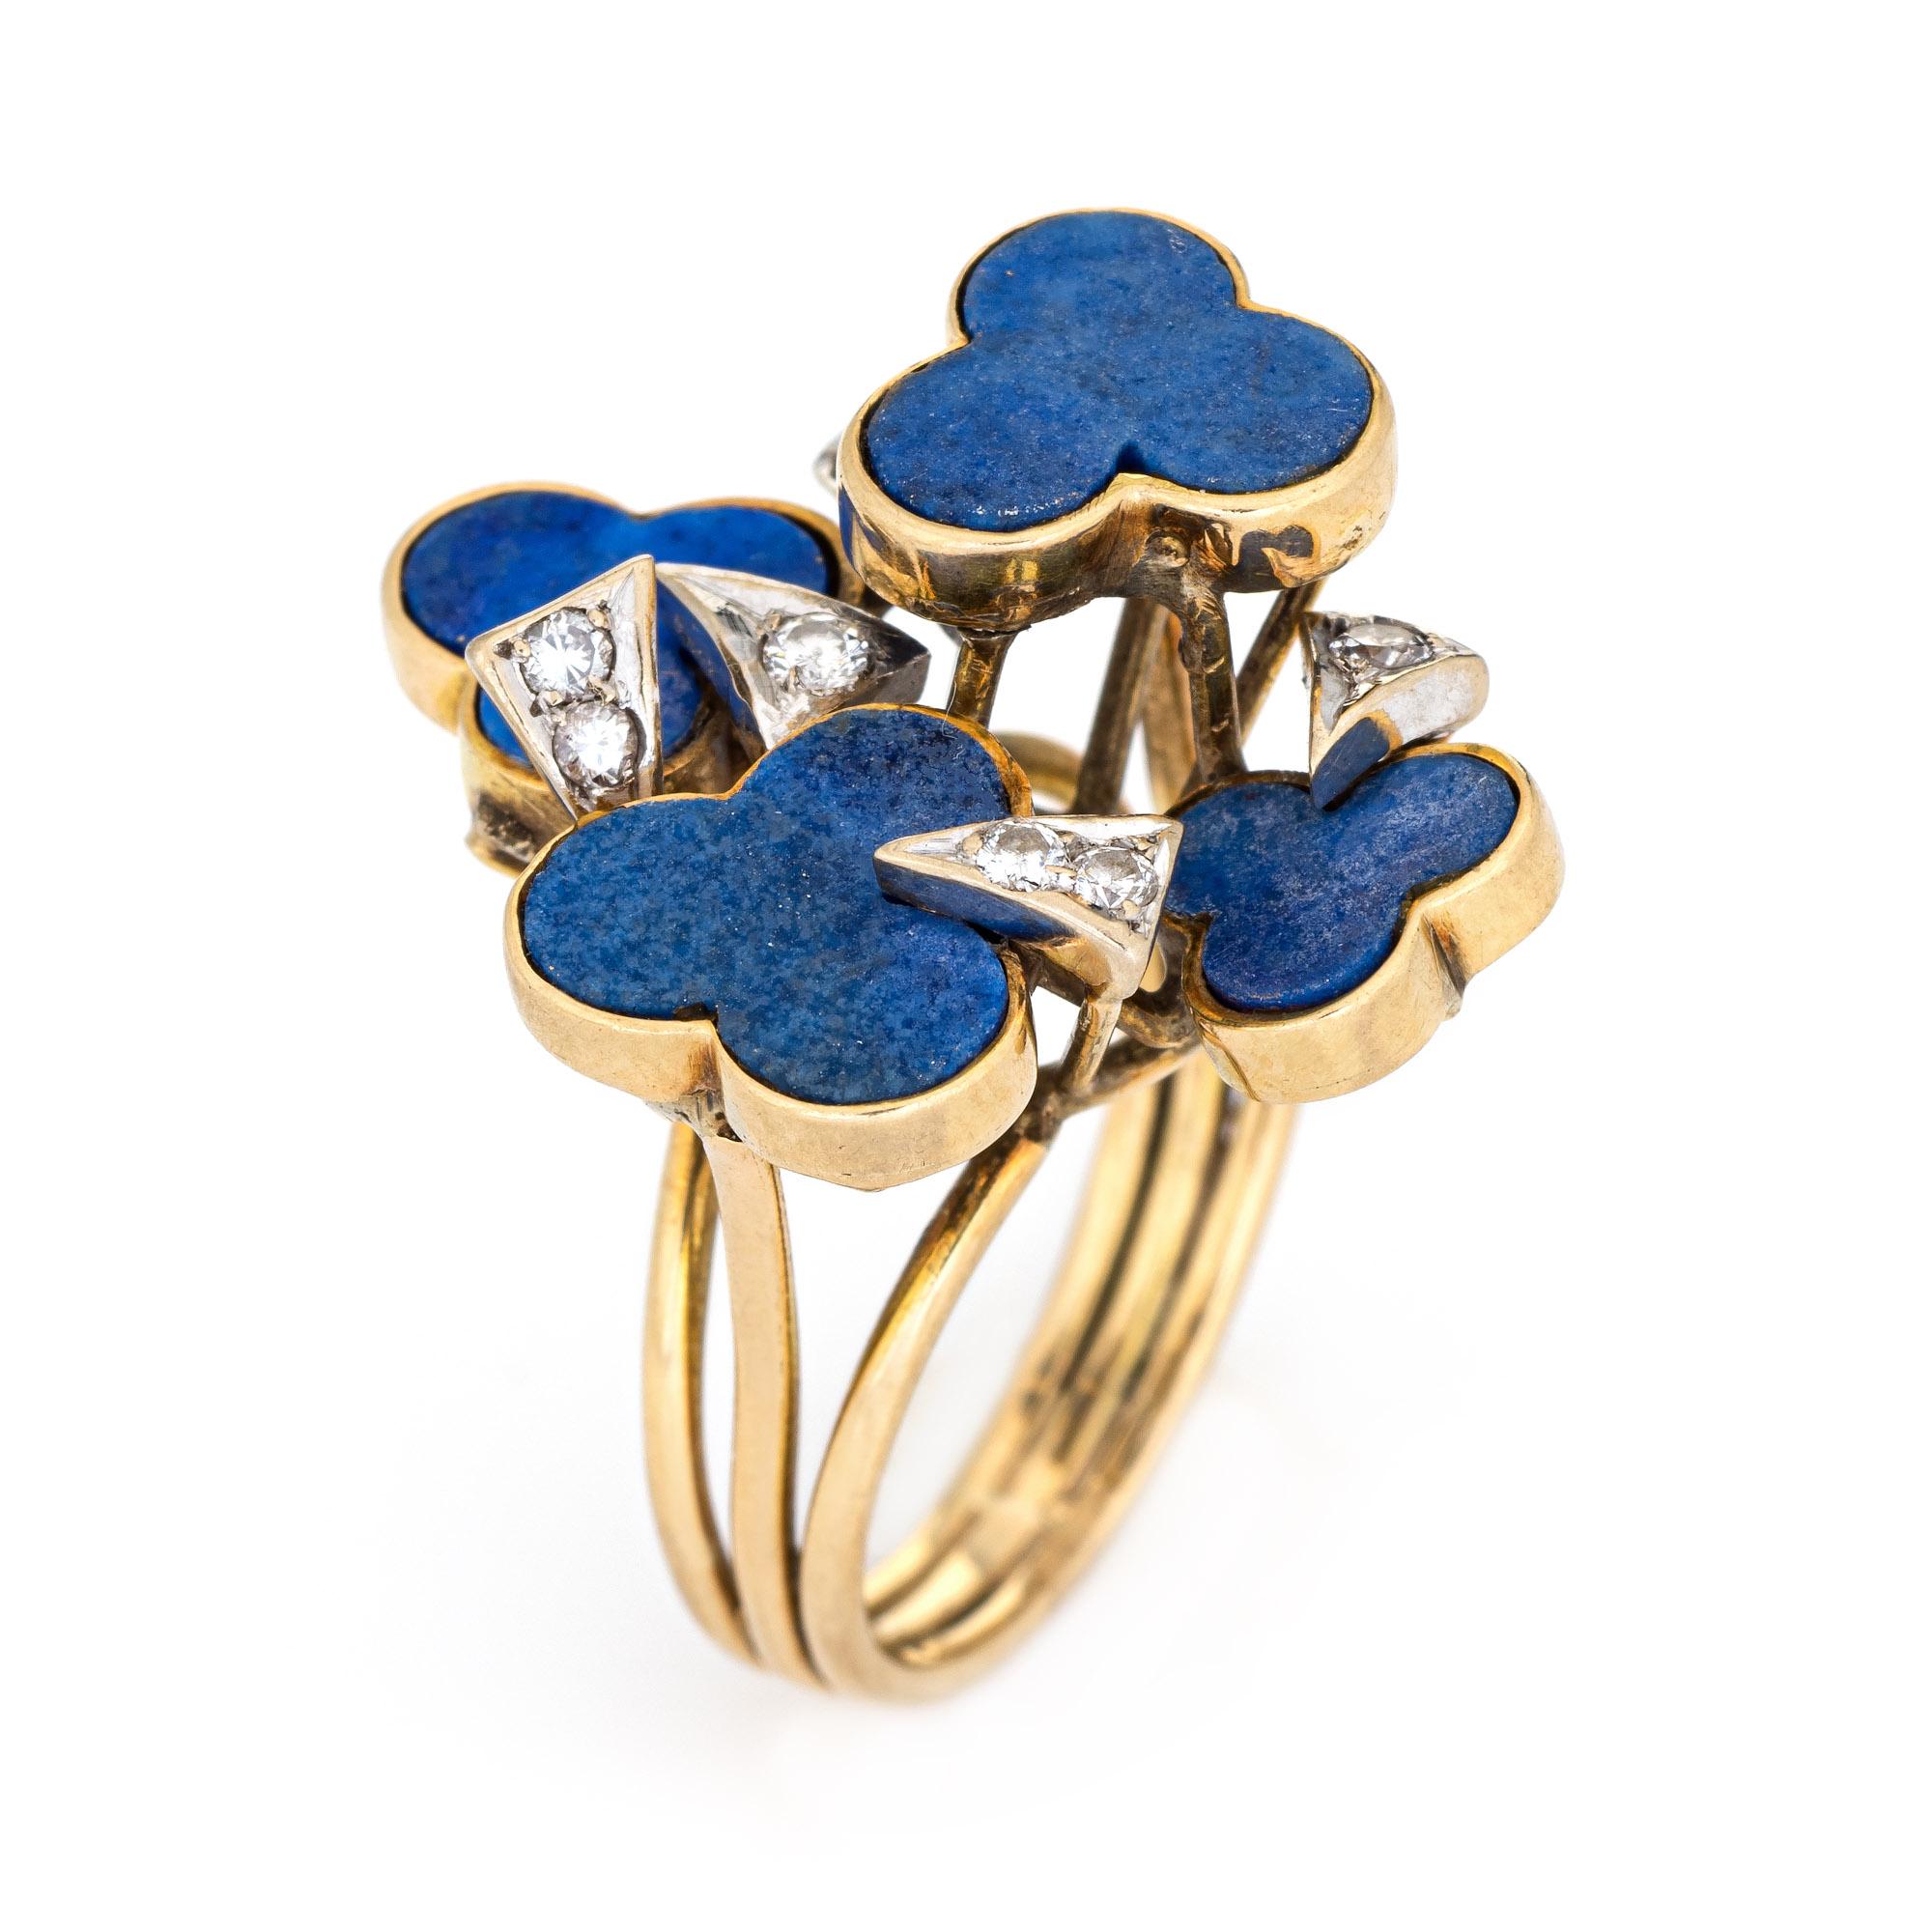 Stylish vintage Shamrock ring set with lapis lazuli & diamonds (circa 1960s to 1970s) crafted in 14 karat yellow gold. 

Lapis lazuli is inlaid into the mounts measuring 9mm. 9 diamonds total an estimated 0.05 carats (estimated at H-I color and